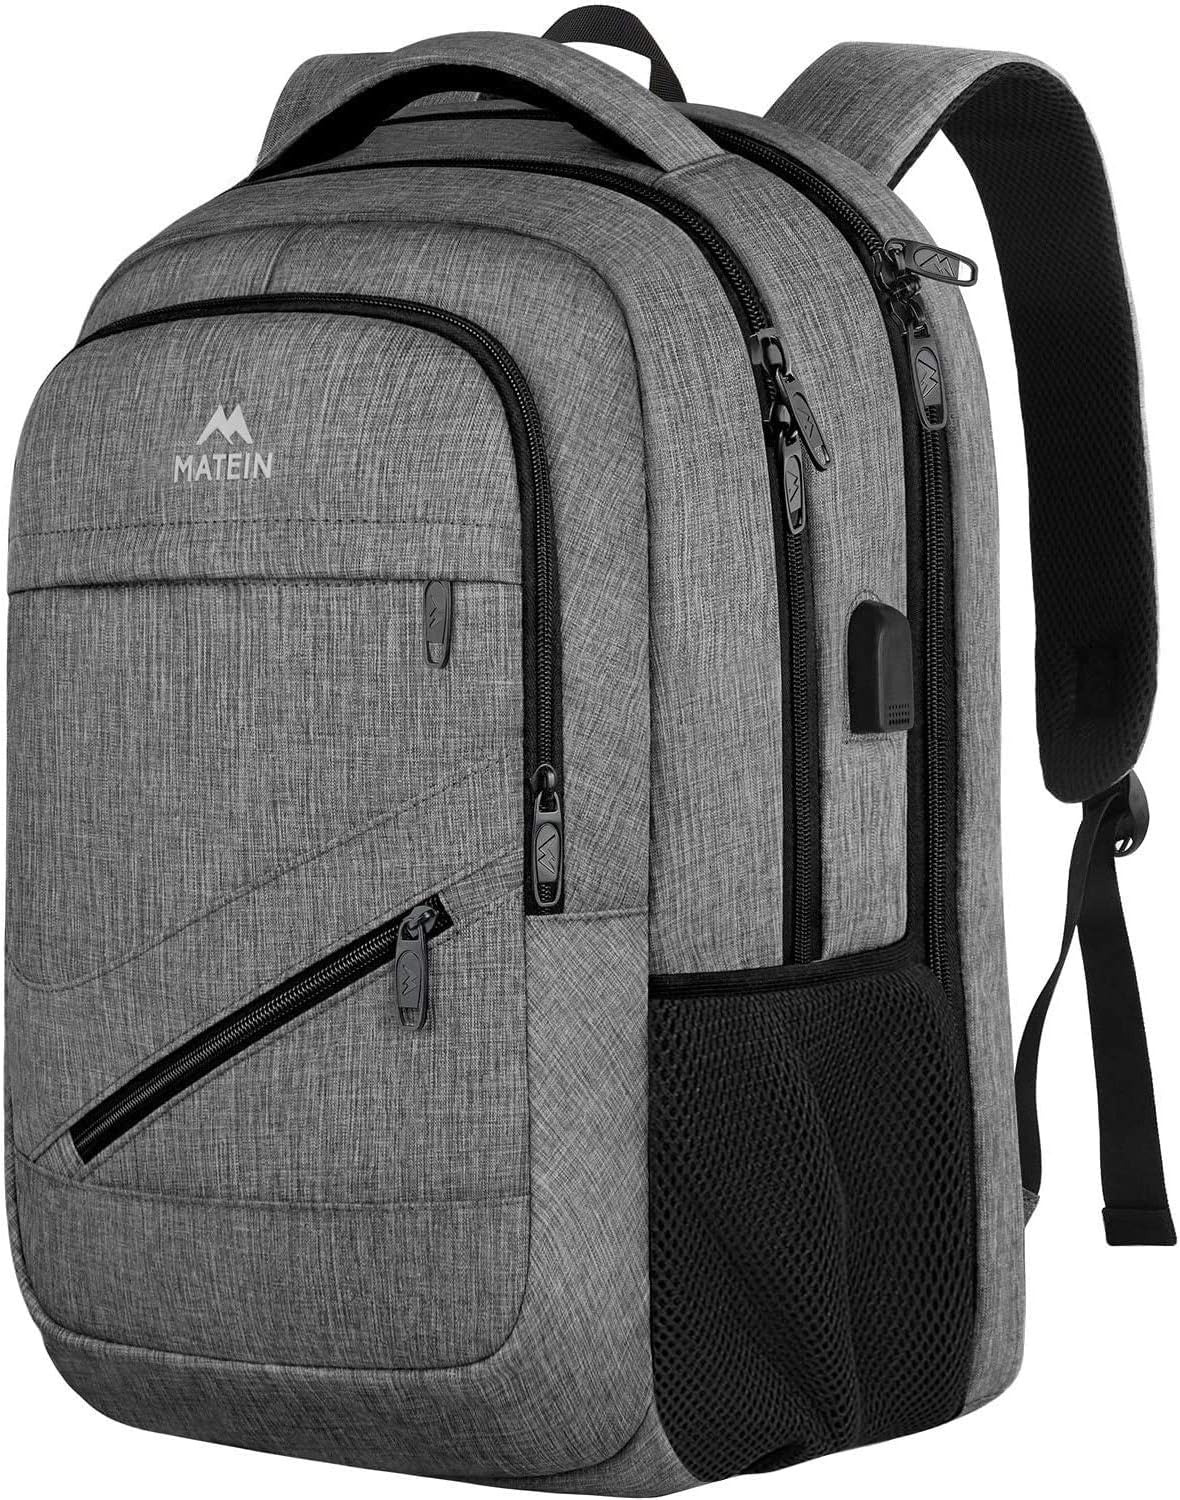 MATEIN Travel Laptop Backpack, 17 inch Business Flight Approved Carry on TSA for